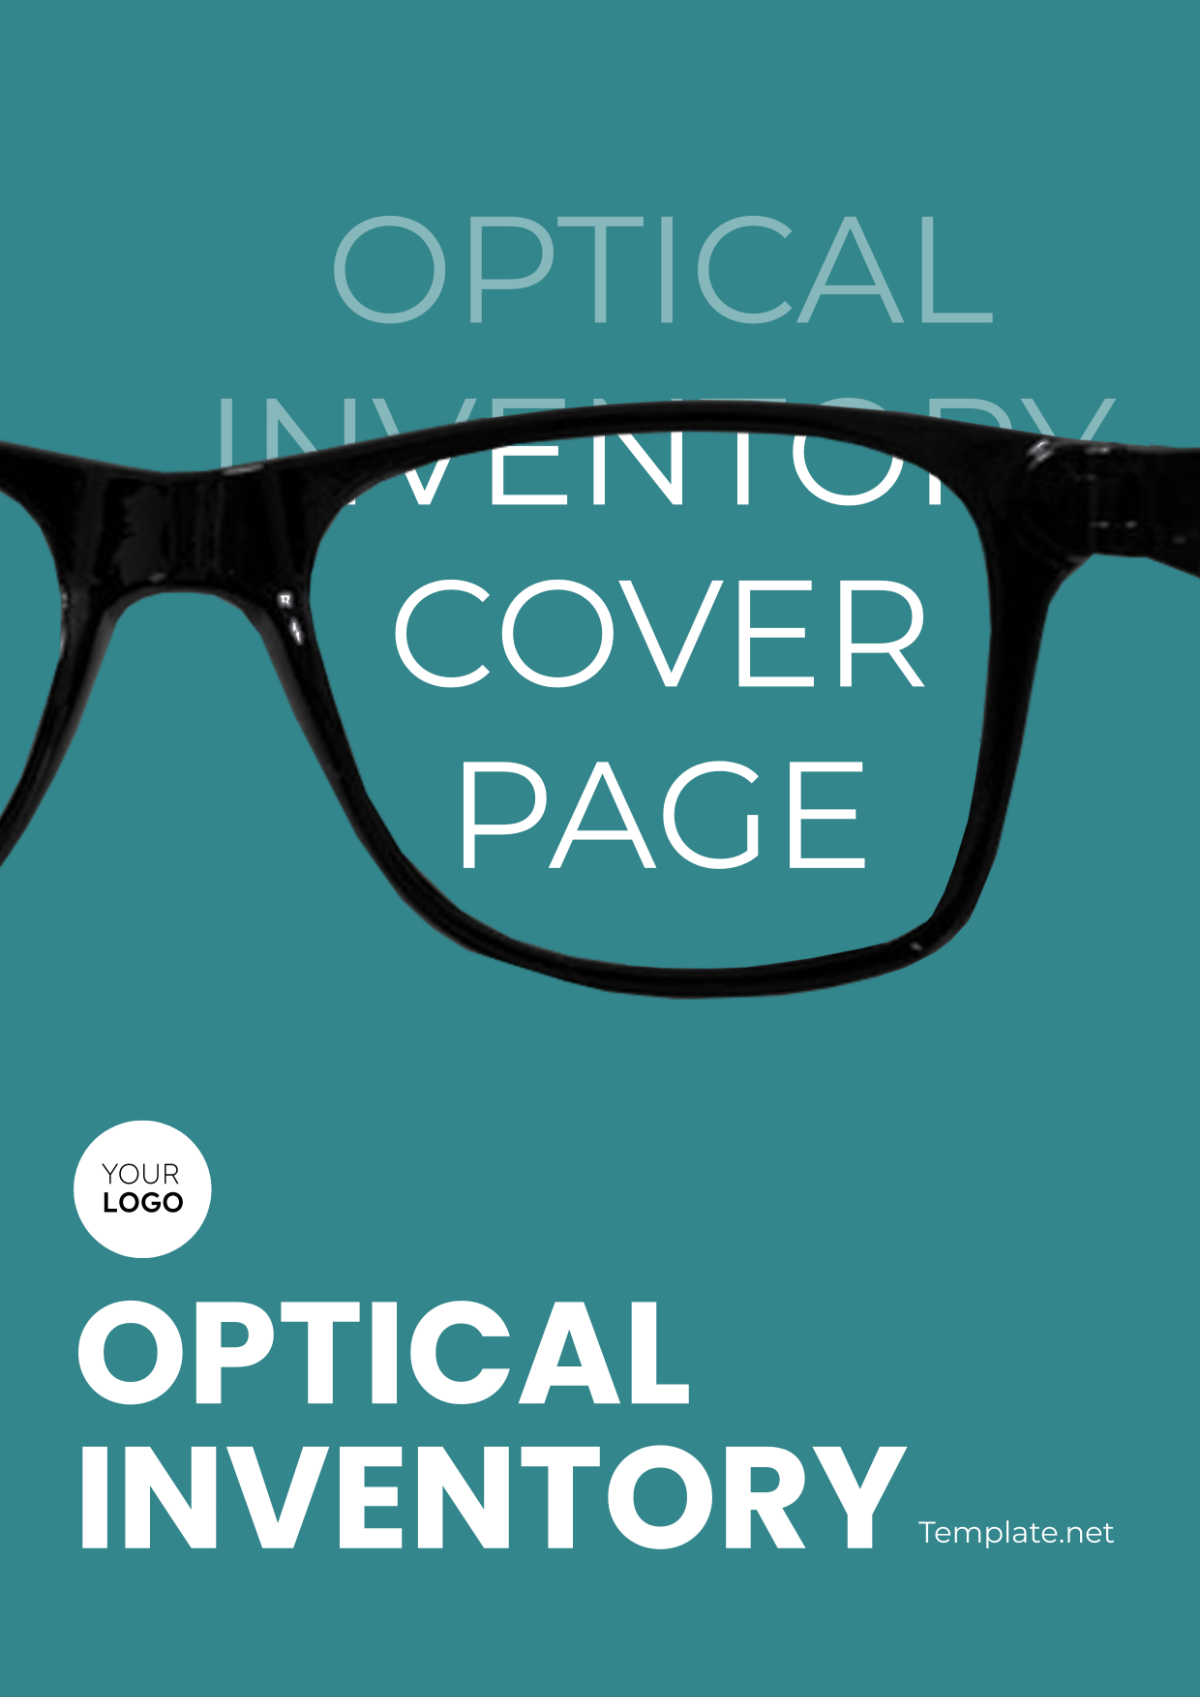 Optical Inventory Cover Page